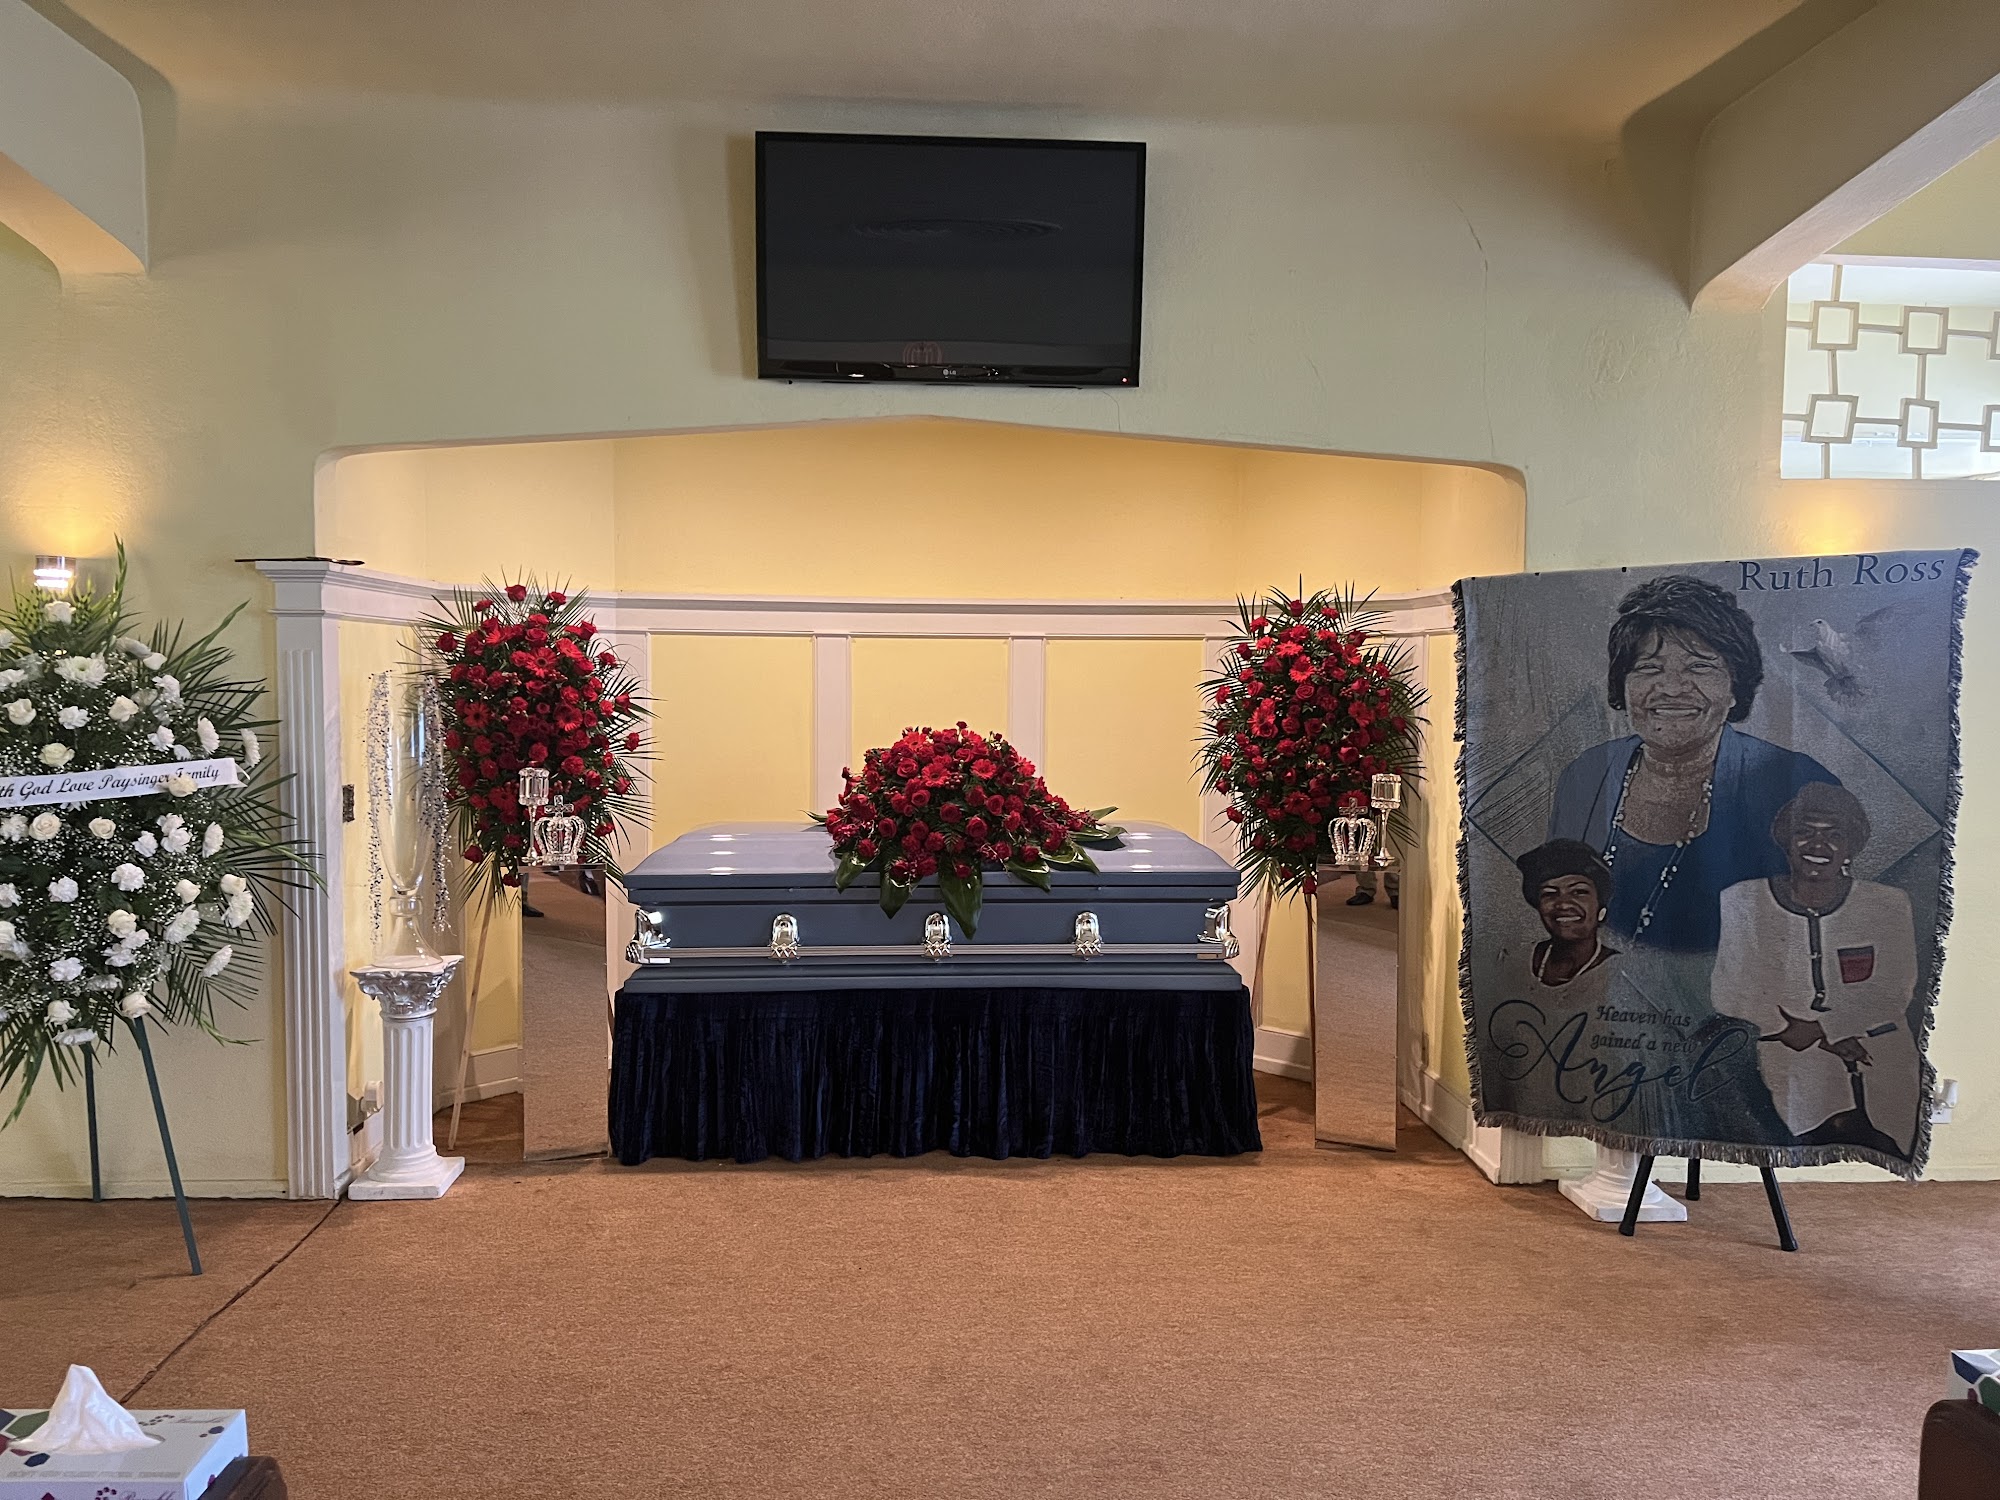 SOUTH LOS ANGELES CREMATION SERVICES